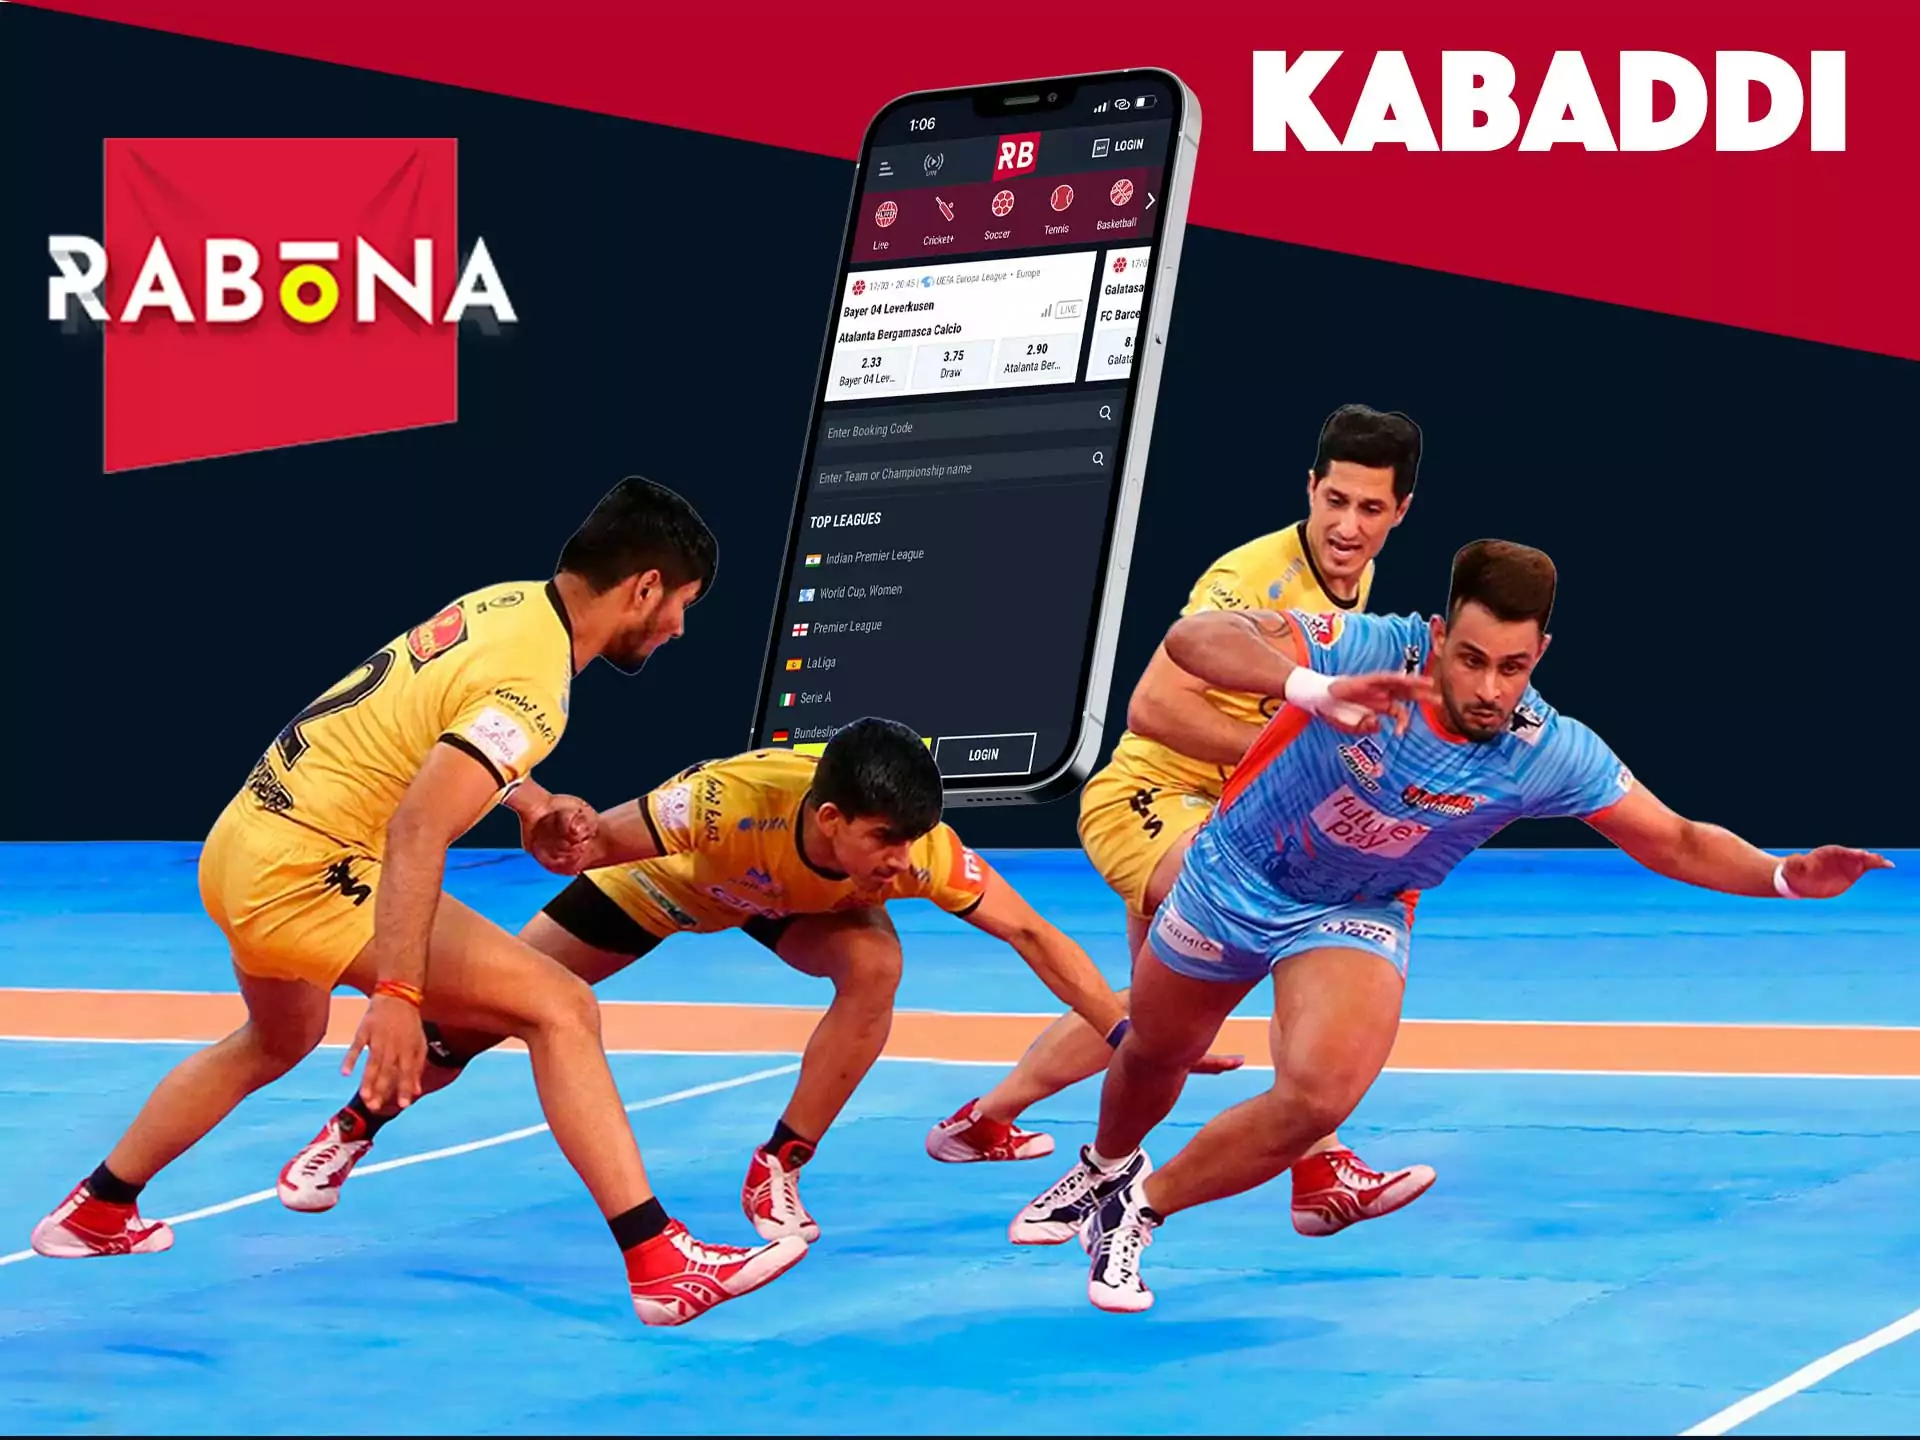 In the Rabona app, you can place bets on the Kabaddi sport.